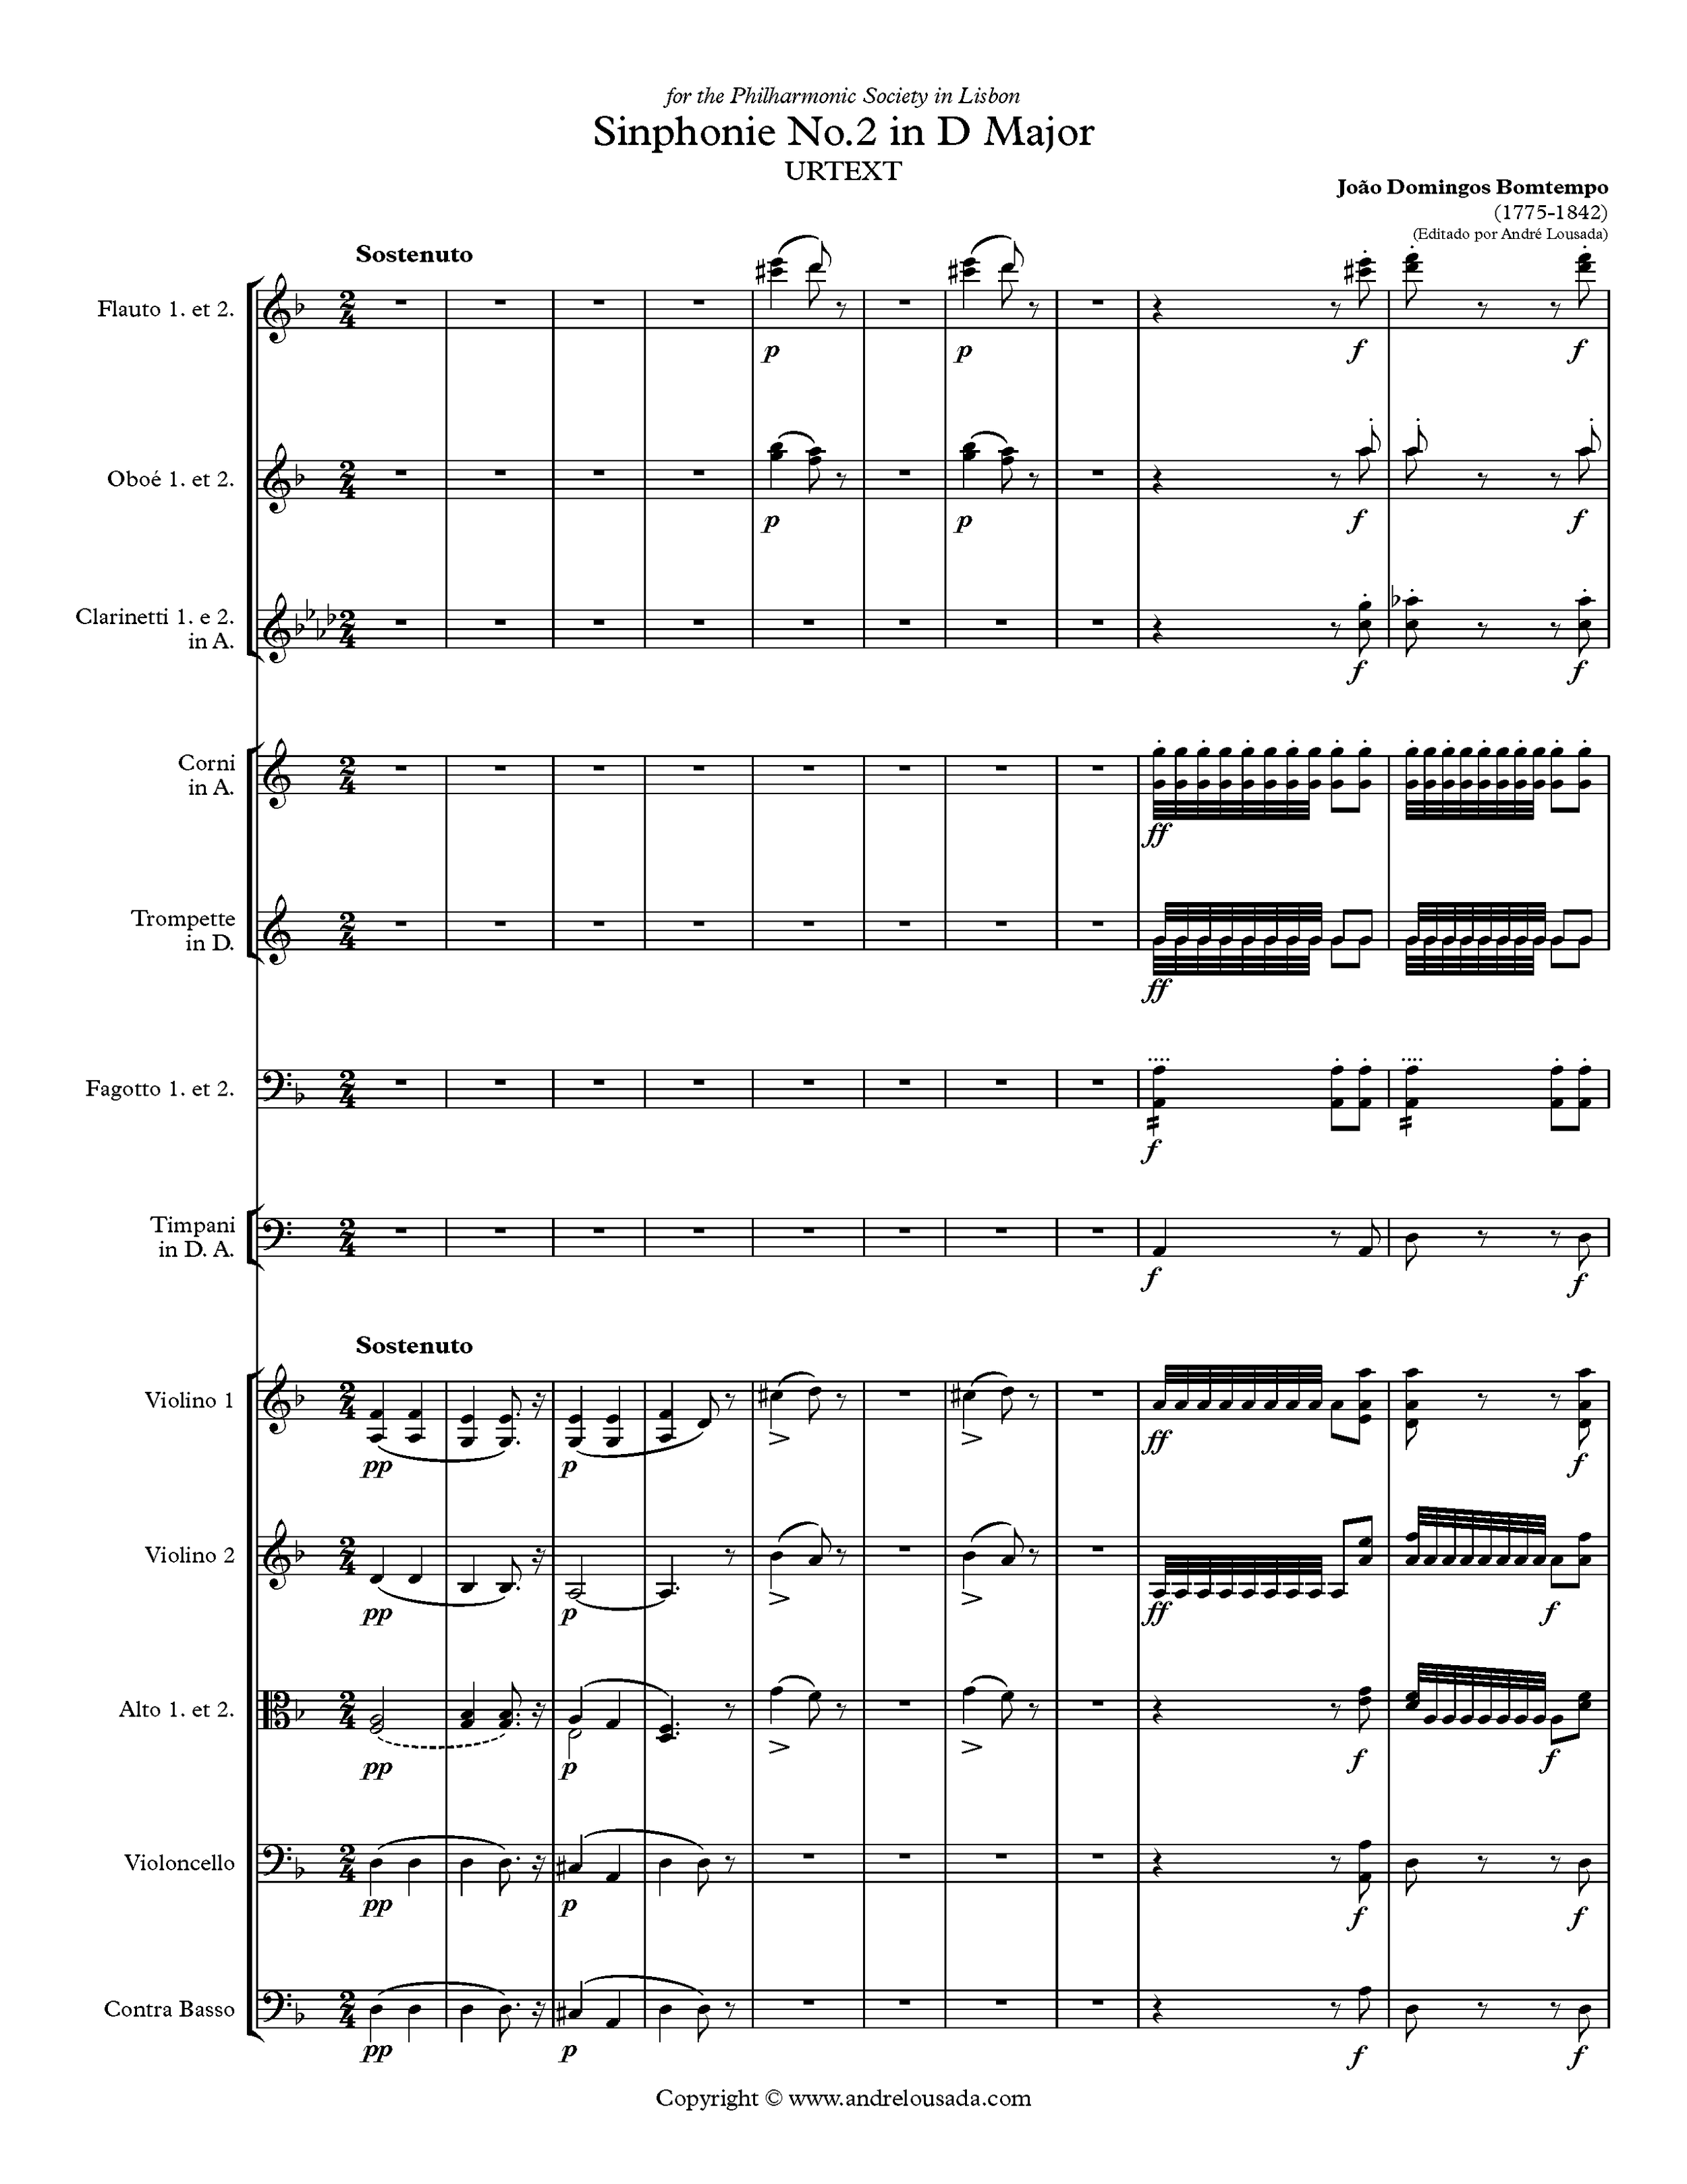 Bomtempo - Sinfonia No2 (PAGE ONE)_0001.png